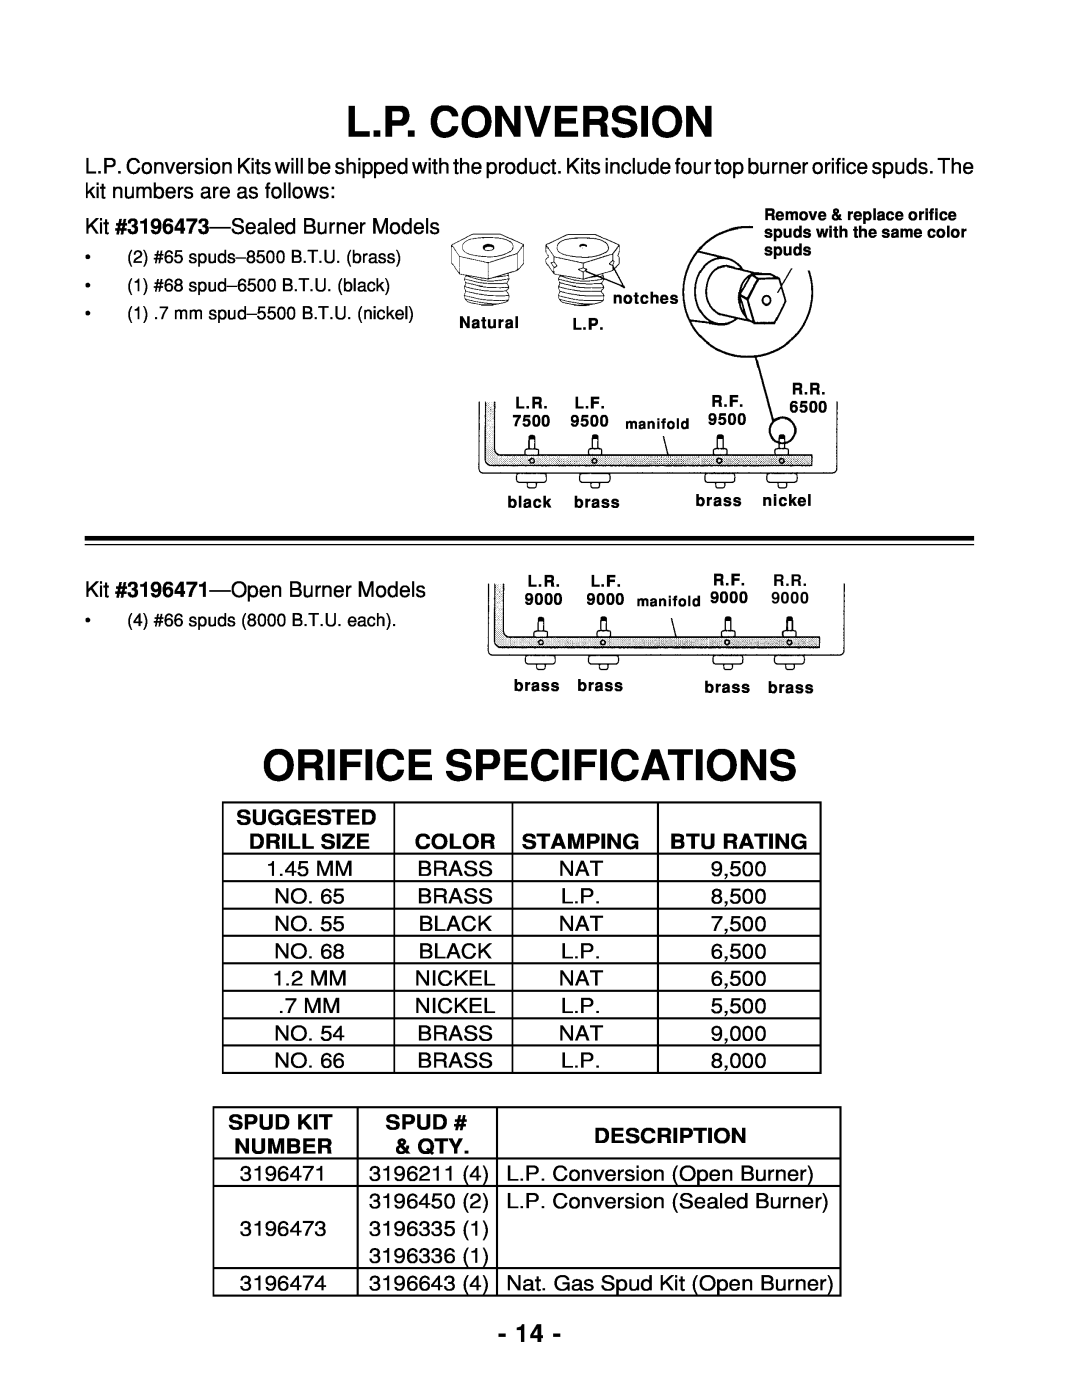 Whirlpool 465 manual L.P. Conversion, Orifice Specifications, Suggested, Color, Stamping, Btu Rating, Drill Size, Spud Kit 